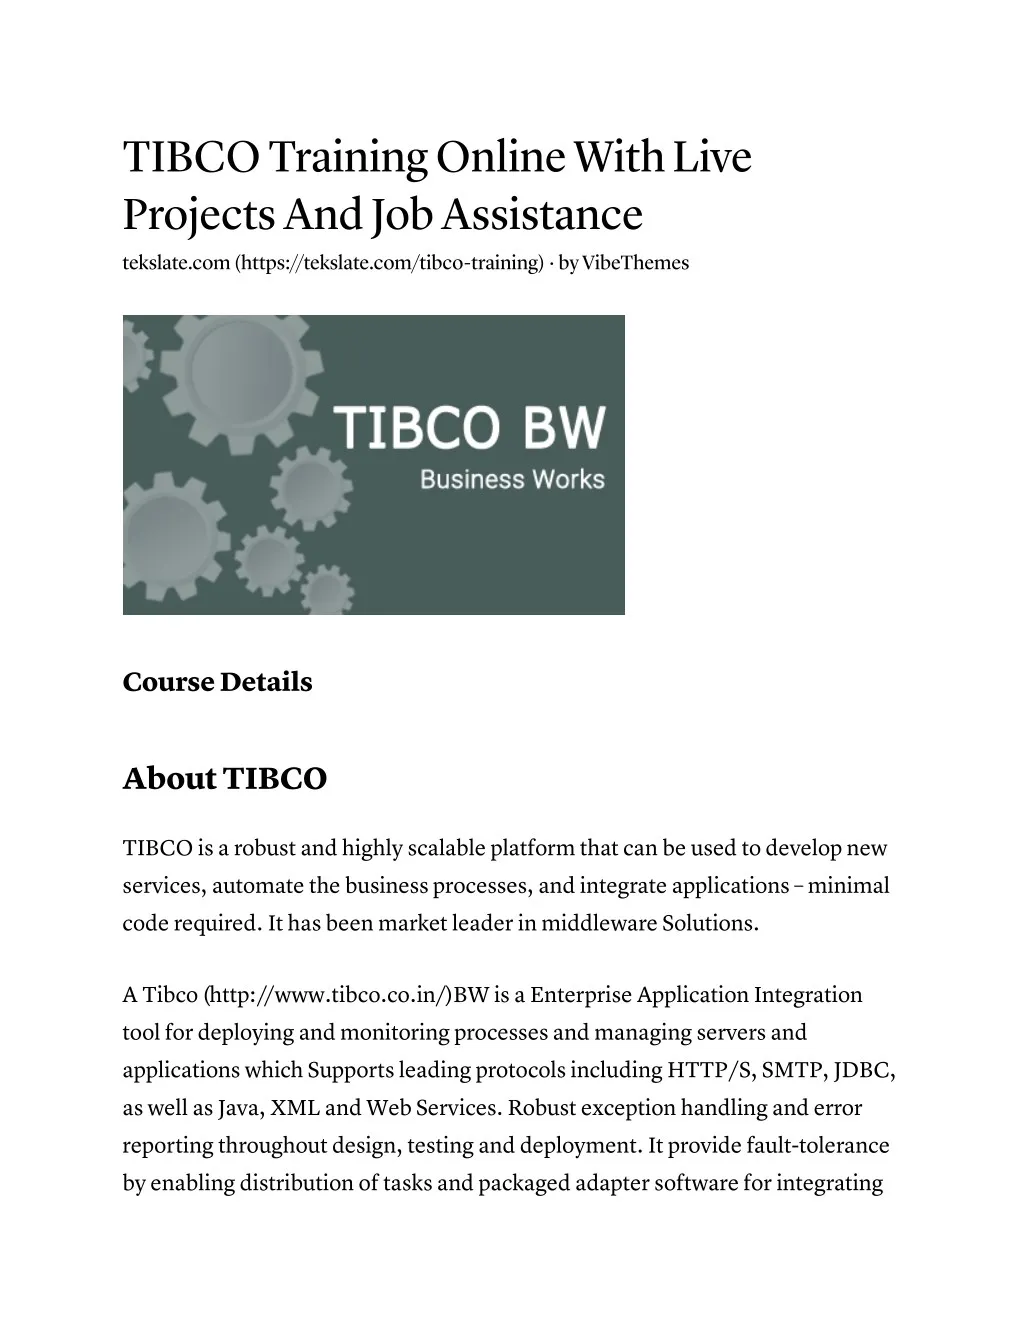 tibco training online with live projects